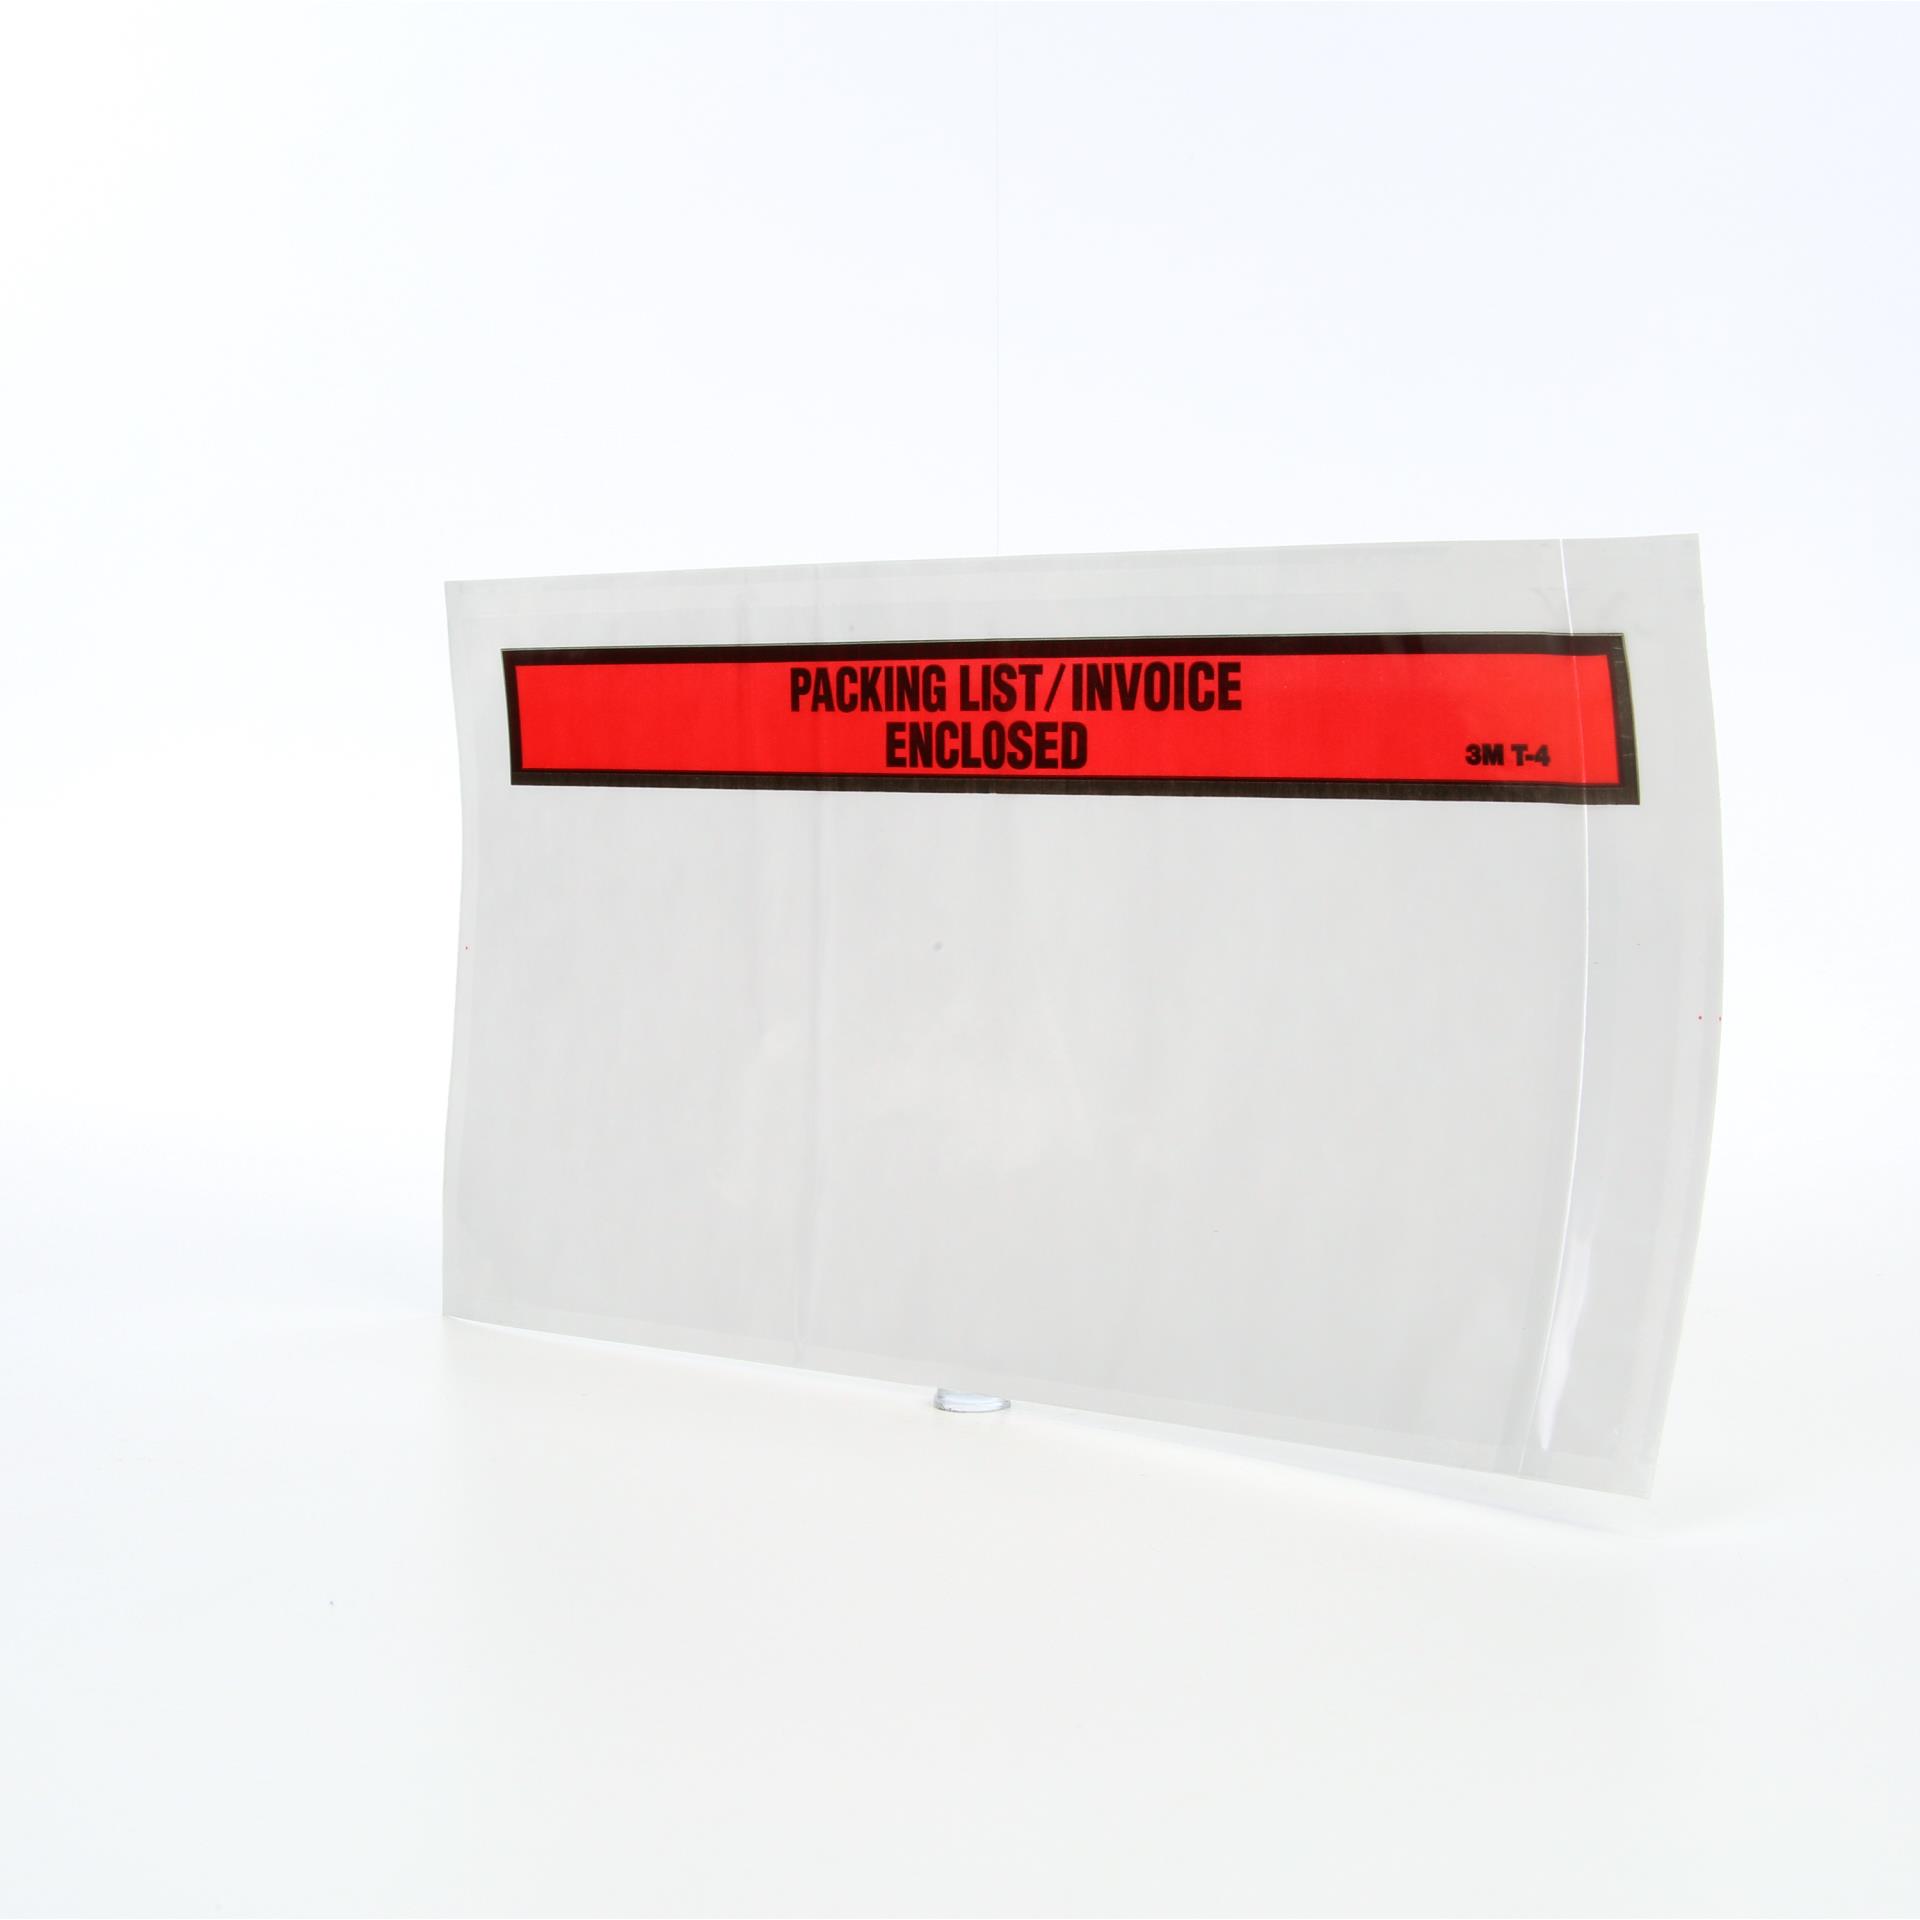 3M™ Top Print Packing List Envelope PLE-T4, 5-1/2 in x 10 in, 1000 per case  Aircraft 9393800